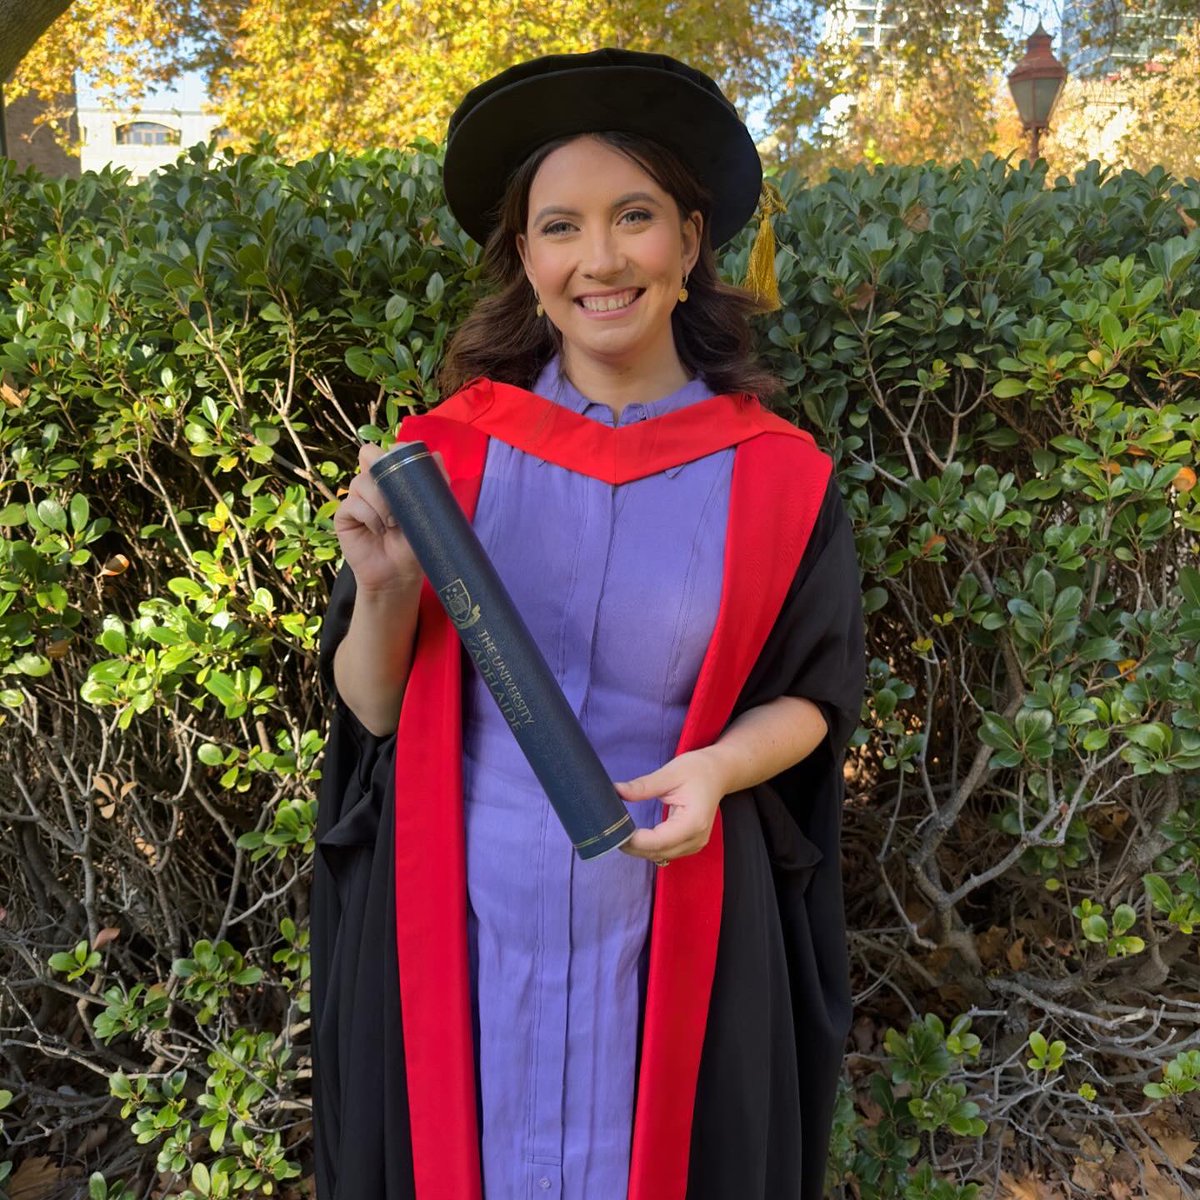 Finally closing the chapter on #PhD & student life @UniofAdelaide 👩🏻‍🎓🍾 I’m grateful for the lessons & friendships I’ve gained over the last 8 years and excited to now do my part supporting the next generation of researchers as an Adjunct Fellow with @AdelaideSPH 😊